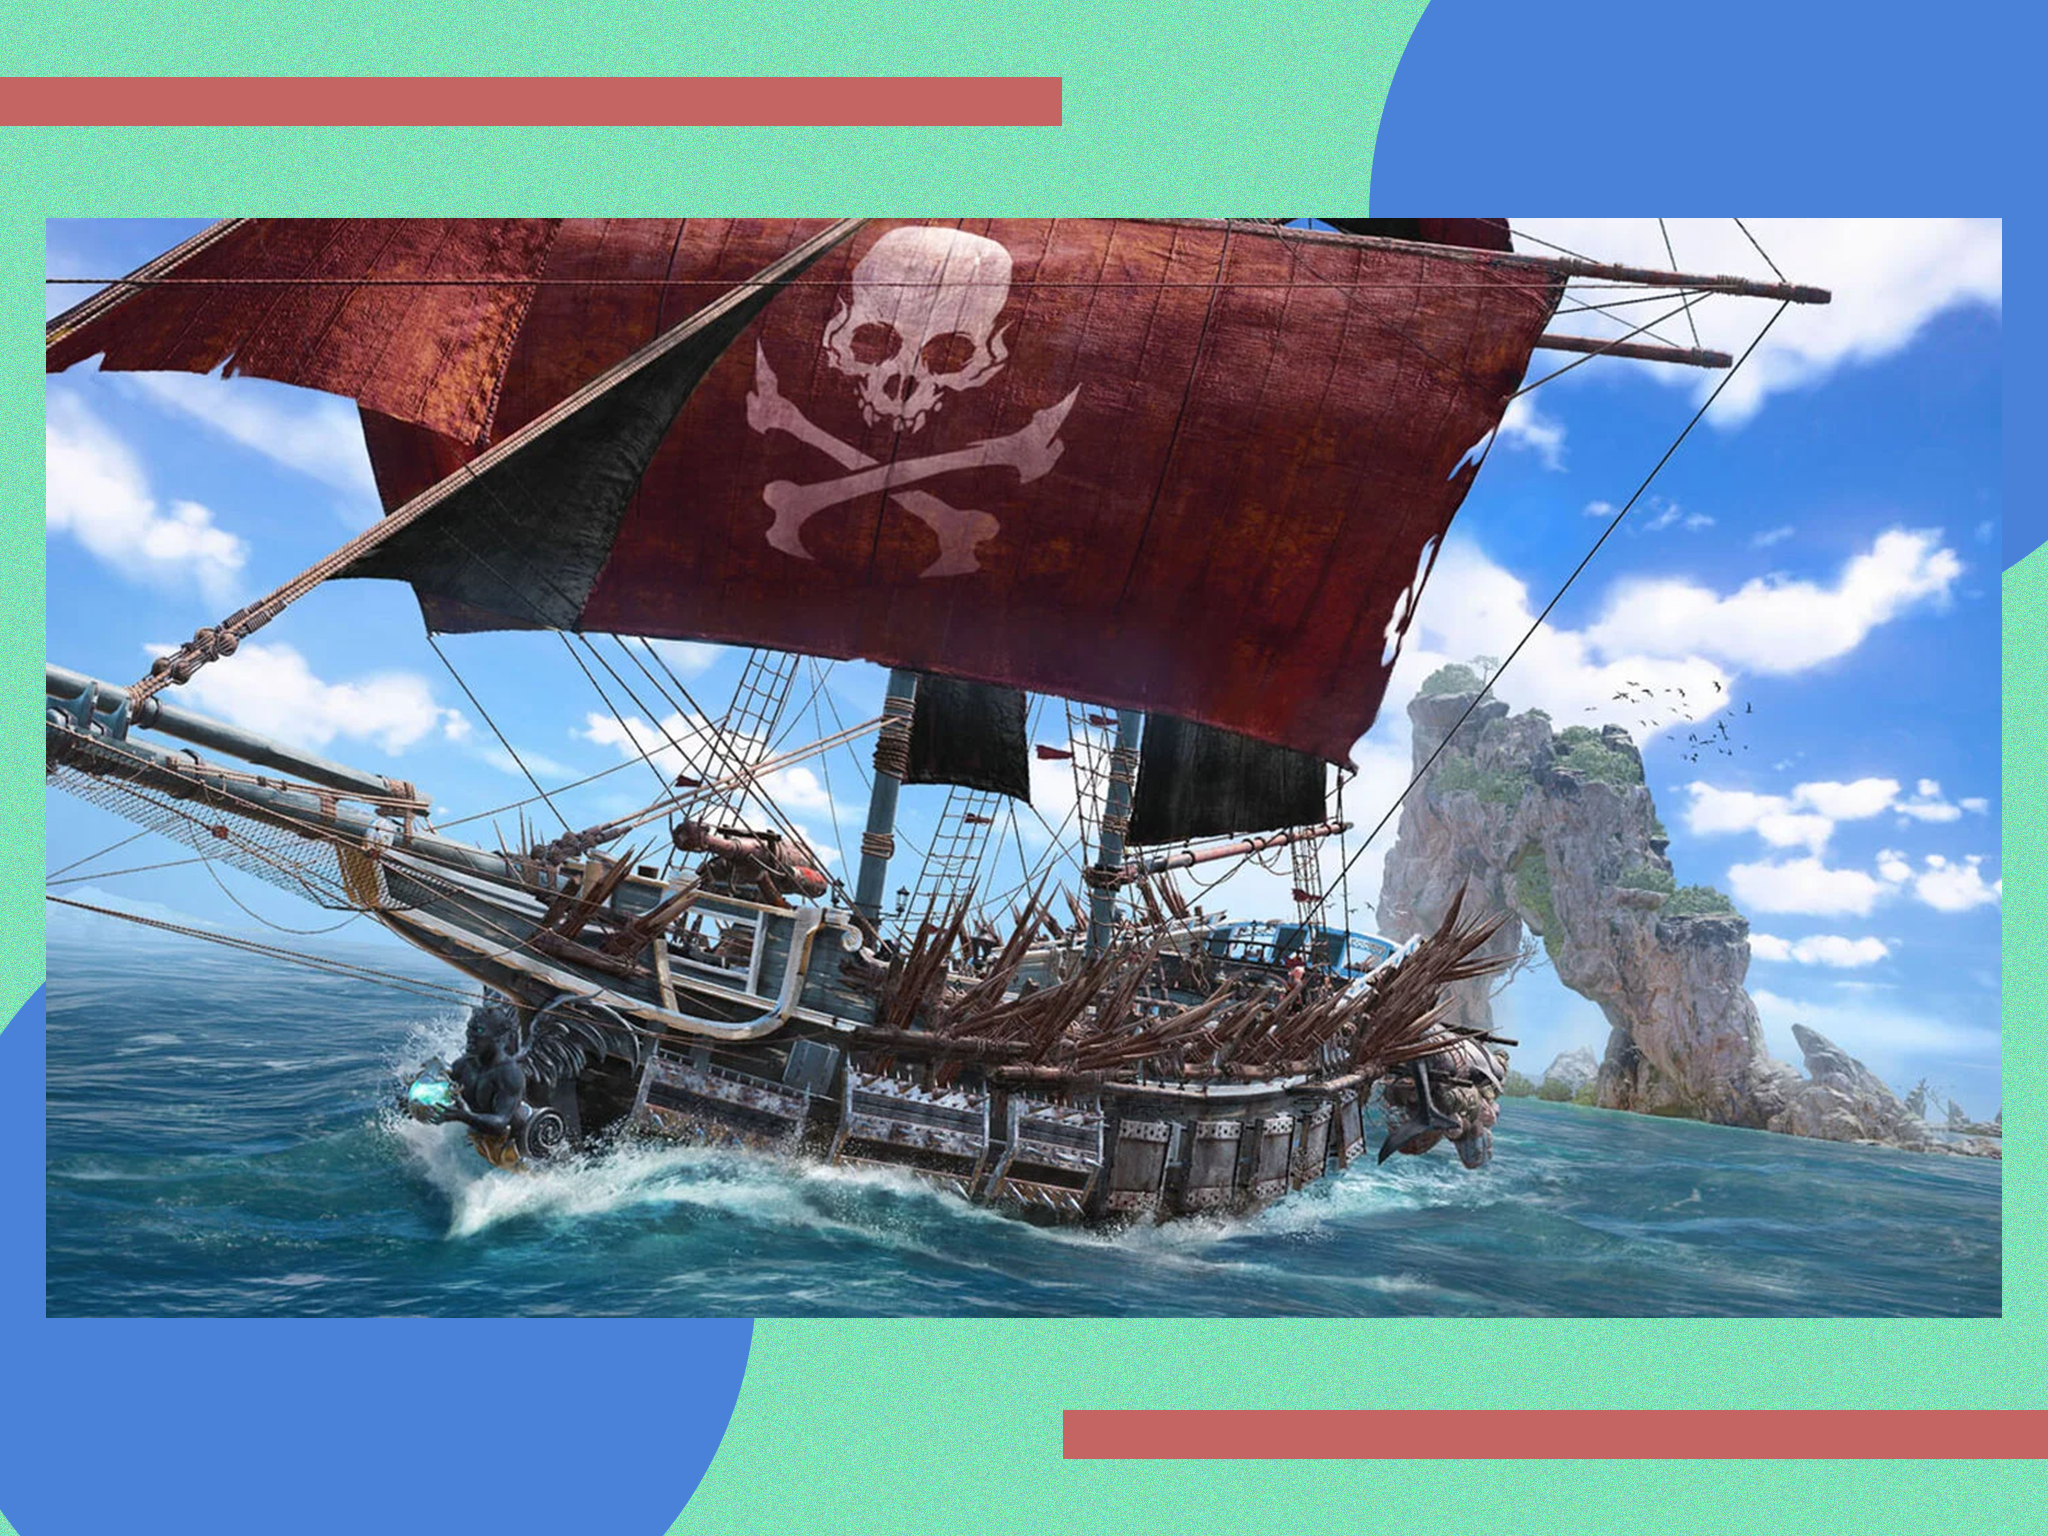 Customise your own ship before plundering the high seas